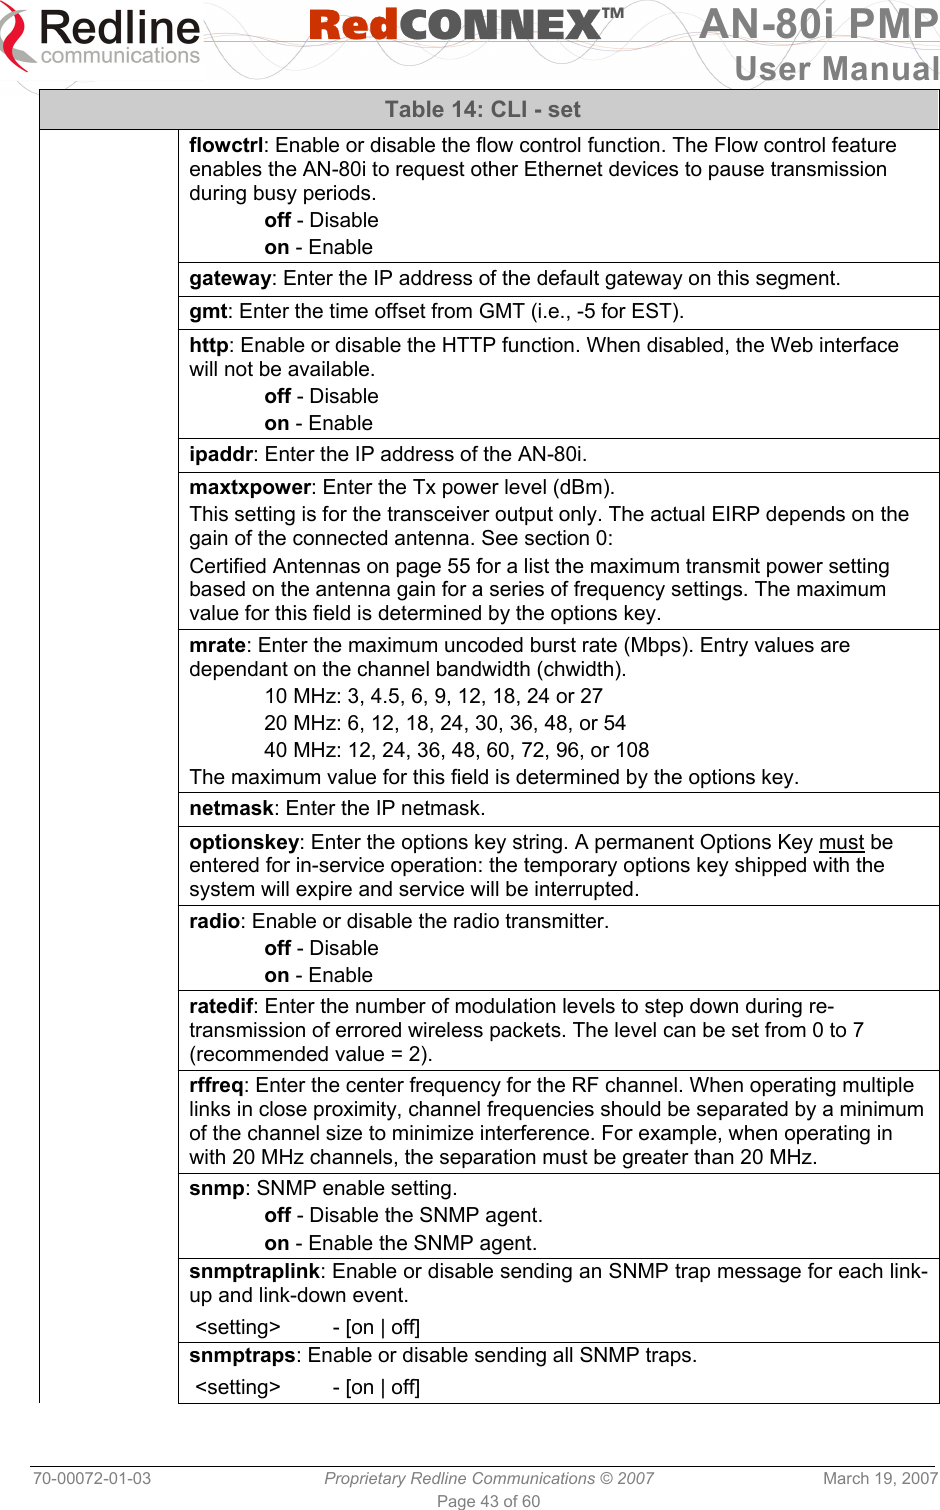   RedCONNEXTM AN-80i PMP User Manual 70-00072-01-03  Proprietary Redline Communications © 2007  March 19, 2007 Page 43 of 60 Table 14: CLI - set  flowctrl: Enable or disable the flow control function. The Flow control feature enables the AN-80i to request other Ethernet devices to pause transmission during busy periods.  off - Disable  on - Enable  gateway: Enter the IP address of the default gateway on this segment.  gmt: Enter the time offset from GMT (i.e., -5 for EST).  http: Enable or disable the HTTP function. When disabled, the Web interface will not be available.  off - Disable  on - Enable  ipaddr: Enter the IP address of the AN-80i.  maxtxpower: Enter the Tx power level (dBm). This setting is for the transceiver output only. The actual EIRP depends on the gain of the connected antenna. See section 0:  Certified Antennas on page 55 for a list the maximum transmit power setting based on the antenna gain for a series of frequency settings. The maximum value for this field is determined by the options key.  mrate: Enter the maximum uncoded burst rate (Mbps). Entry values are dependant on the channel bandwidth (chwidth).  10 MHz: 3, 4.5, 6, 9, 12, 18, 24 or 27   20 MHz: 6, 12, 18, 24, 30, 36, 48, or 54   40 MHz: 12, 24, 36, 48, 60, 72, 96, or 108  The maximum value for this field is determined by the options key.  netmask: Enter the IP netmask.  optionskey: Enter the options key string. A permanent Options Key must be entered for in-service operation: the temporary options key shipped with the system will expire and service will be interrupted.  radio: Enable or disable the radio transmitter.  off - Disable  on - Enable  ratedif: Enter the number of modulation levels to step down during re-transmission of errored wireless packets. The level can be set from 0 to 7 (recommended value = 2).  rffreq: Enter the center frequency for the RF channel. When operating multiple links in close proximity, channel frequencies should be separated by a minimum of the channel size to minimize interference. For example, when operating in with 20 MHz channels, the separation must be greater than 20 MHz.  snmp: SNMP enable setting.  off - Disable the SNMP agent.  on - Enable the SNMP agent.  snmptraplink: Enable or disable sending an SNMP trap message for each link-up and link-down event.  &lt;setting&gt;         - [on | off]  snmptraps: Enable or disable sending all SNMP traps.  &lt;setting&gt;         - [on | off] 